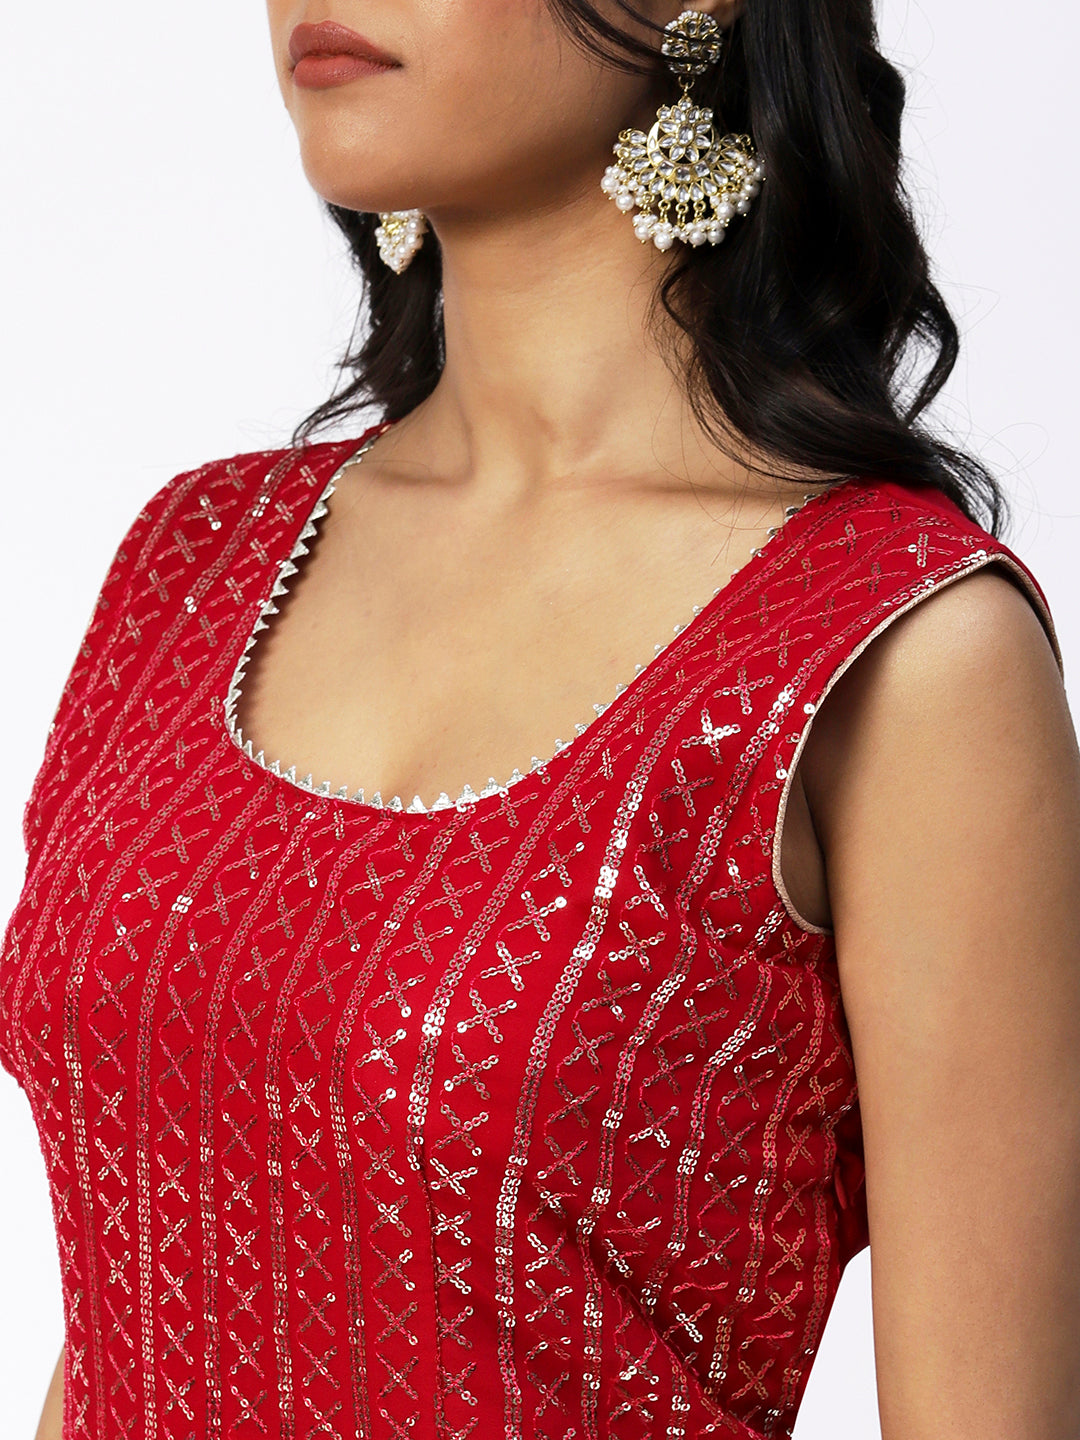 Red Georgette Sharara Suit With Embroidery - PepaBai